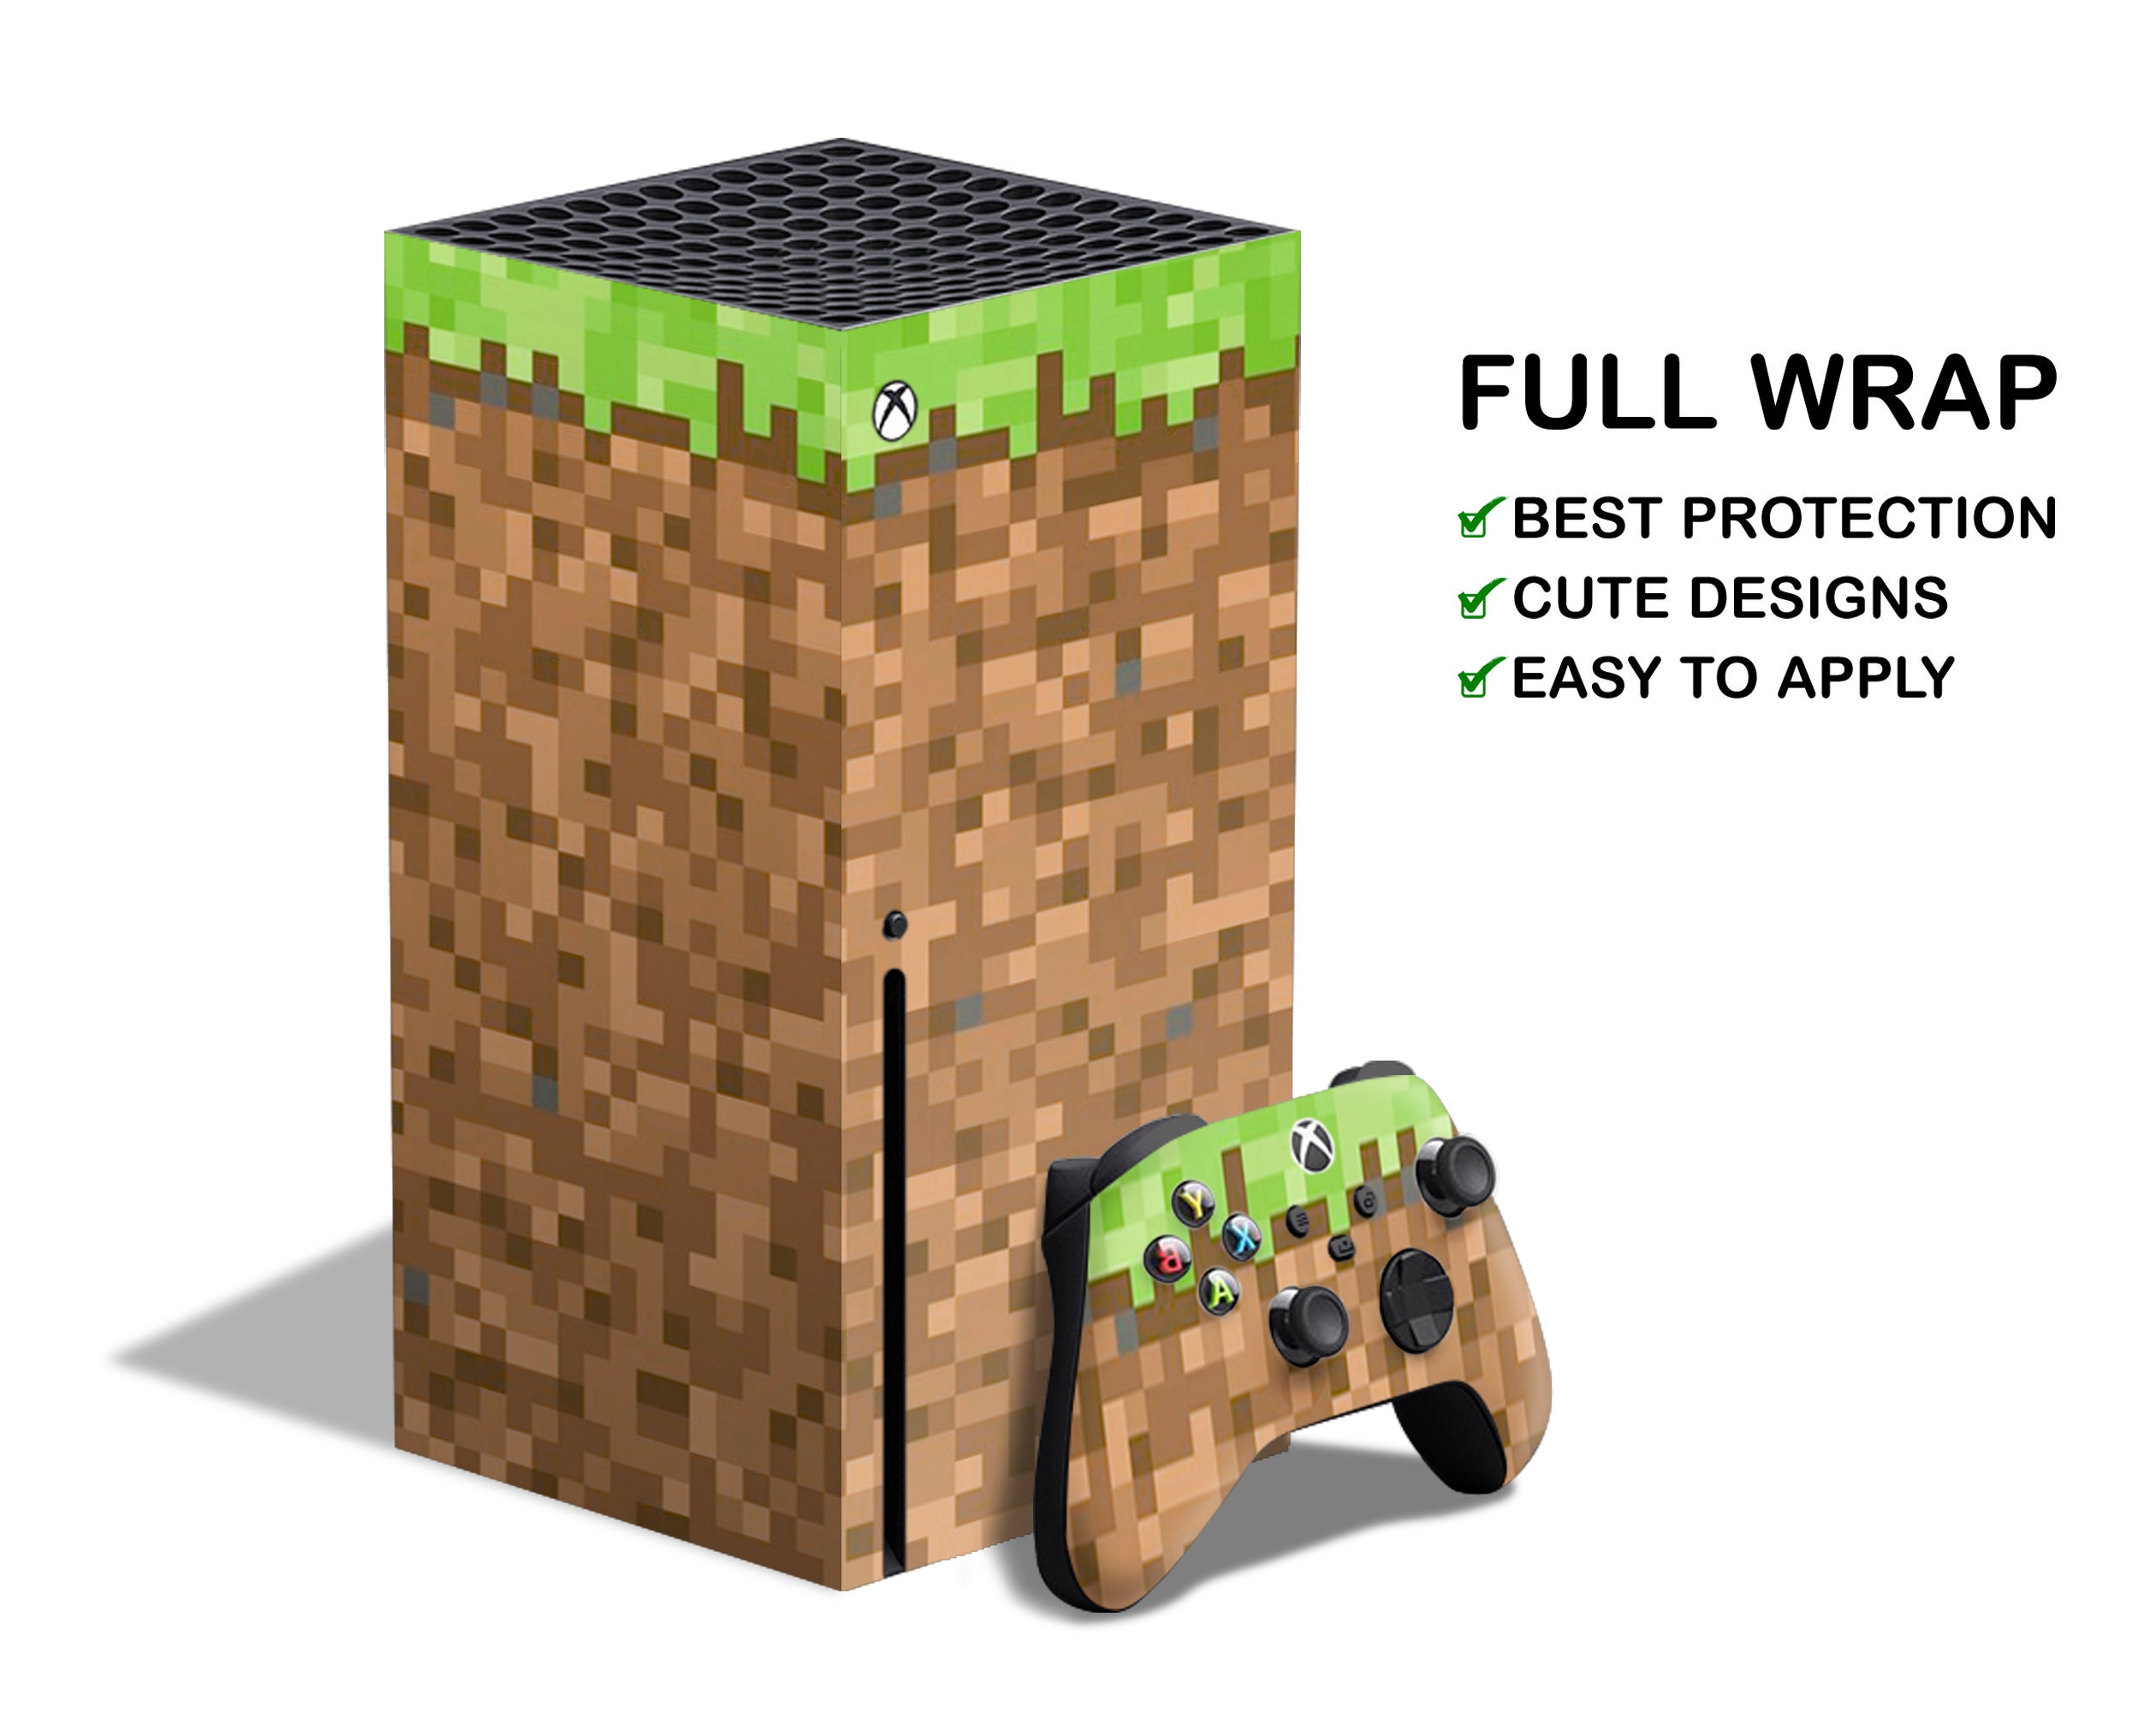 construction Preconception heat Brown Ground Blocks Texture Xbox One X Skin Xbox One S - Etsy Canada